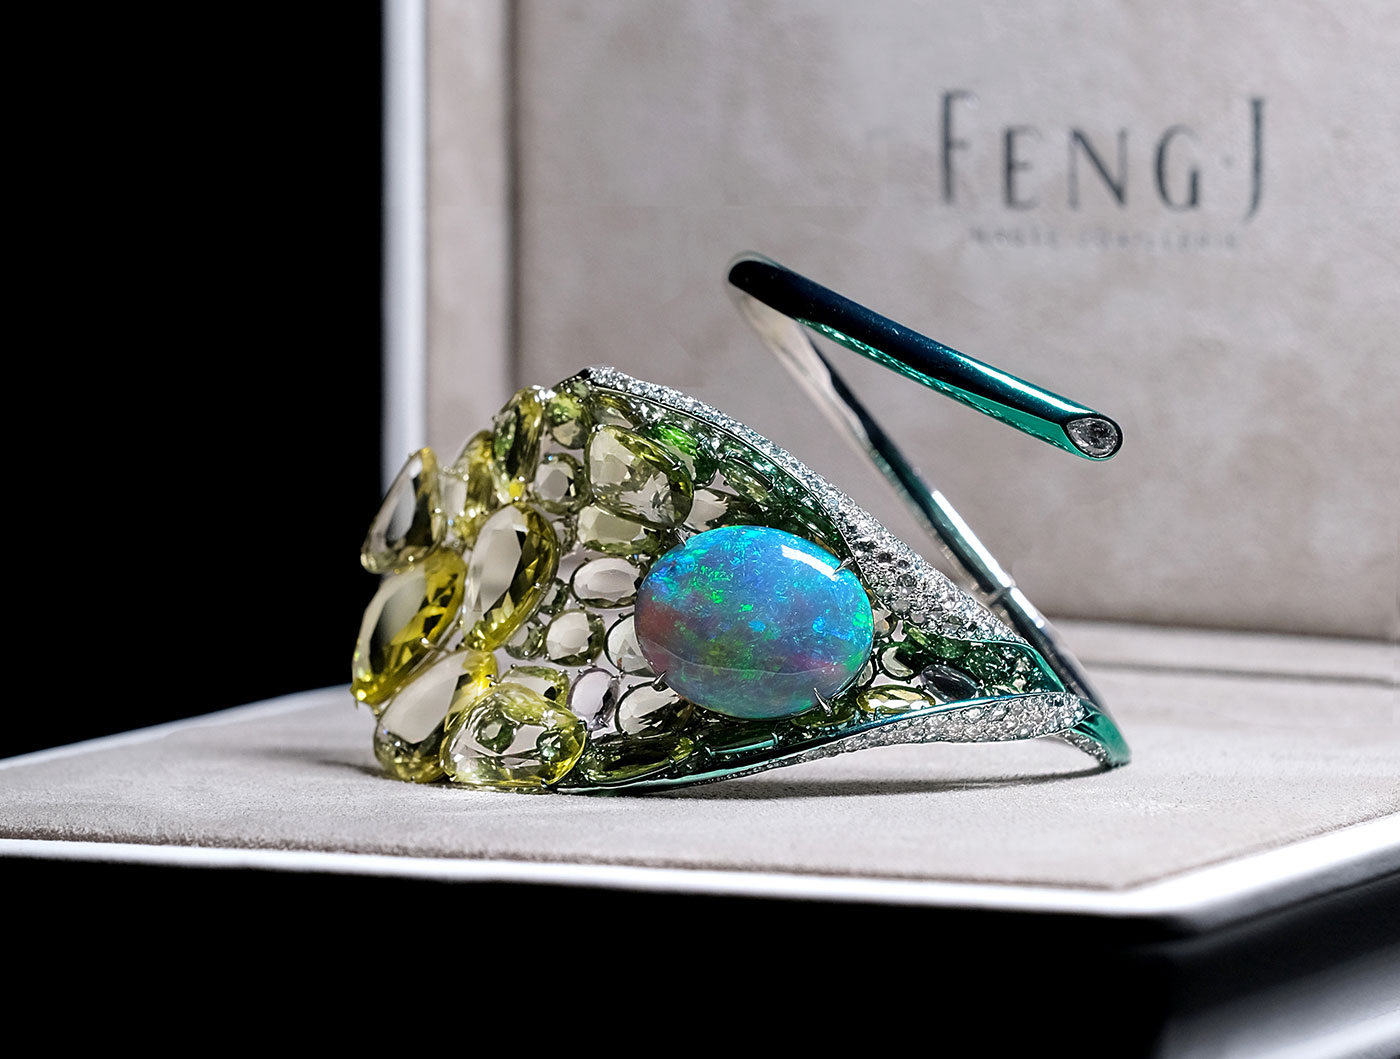 Feng J. Calla Lily bangle with 20.95ct black opal, double rose-cut yellow sapphires and tsavorites, emeralds and diamonds in electroplated gold